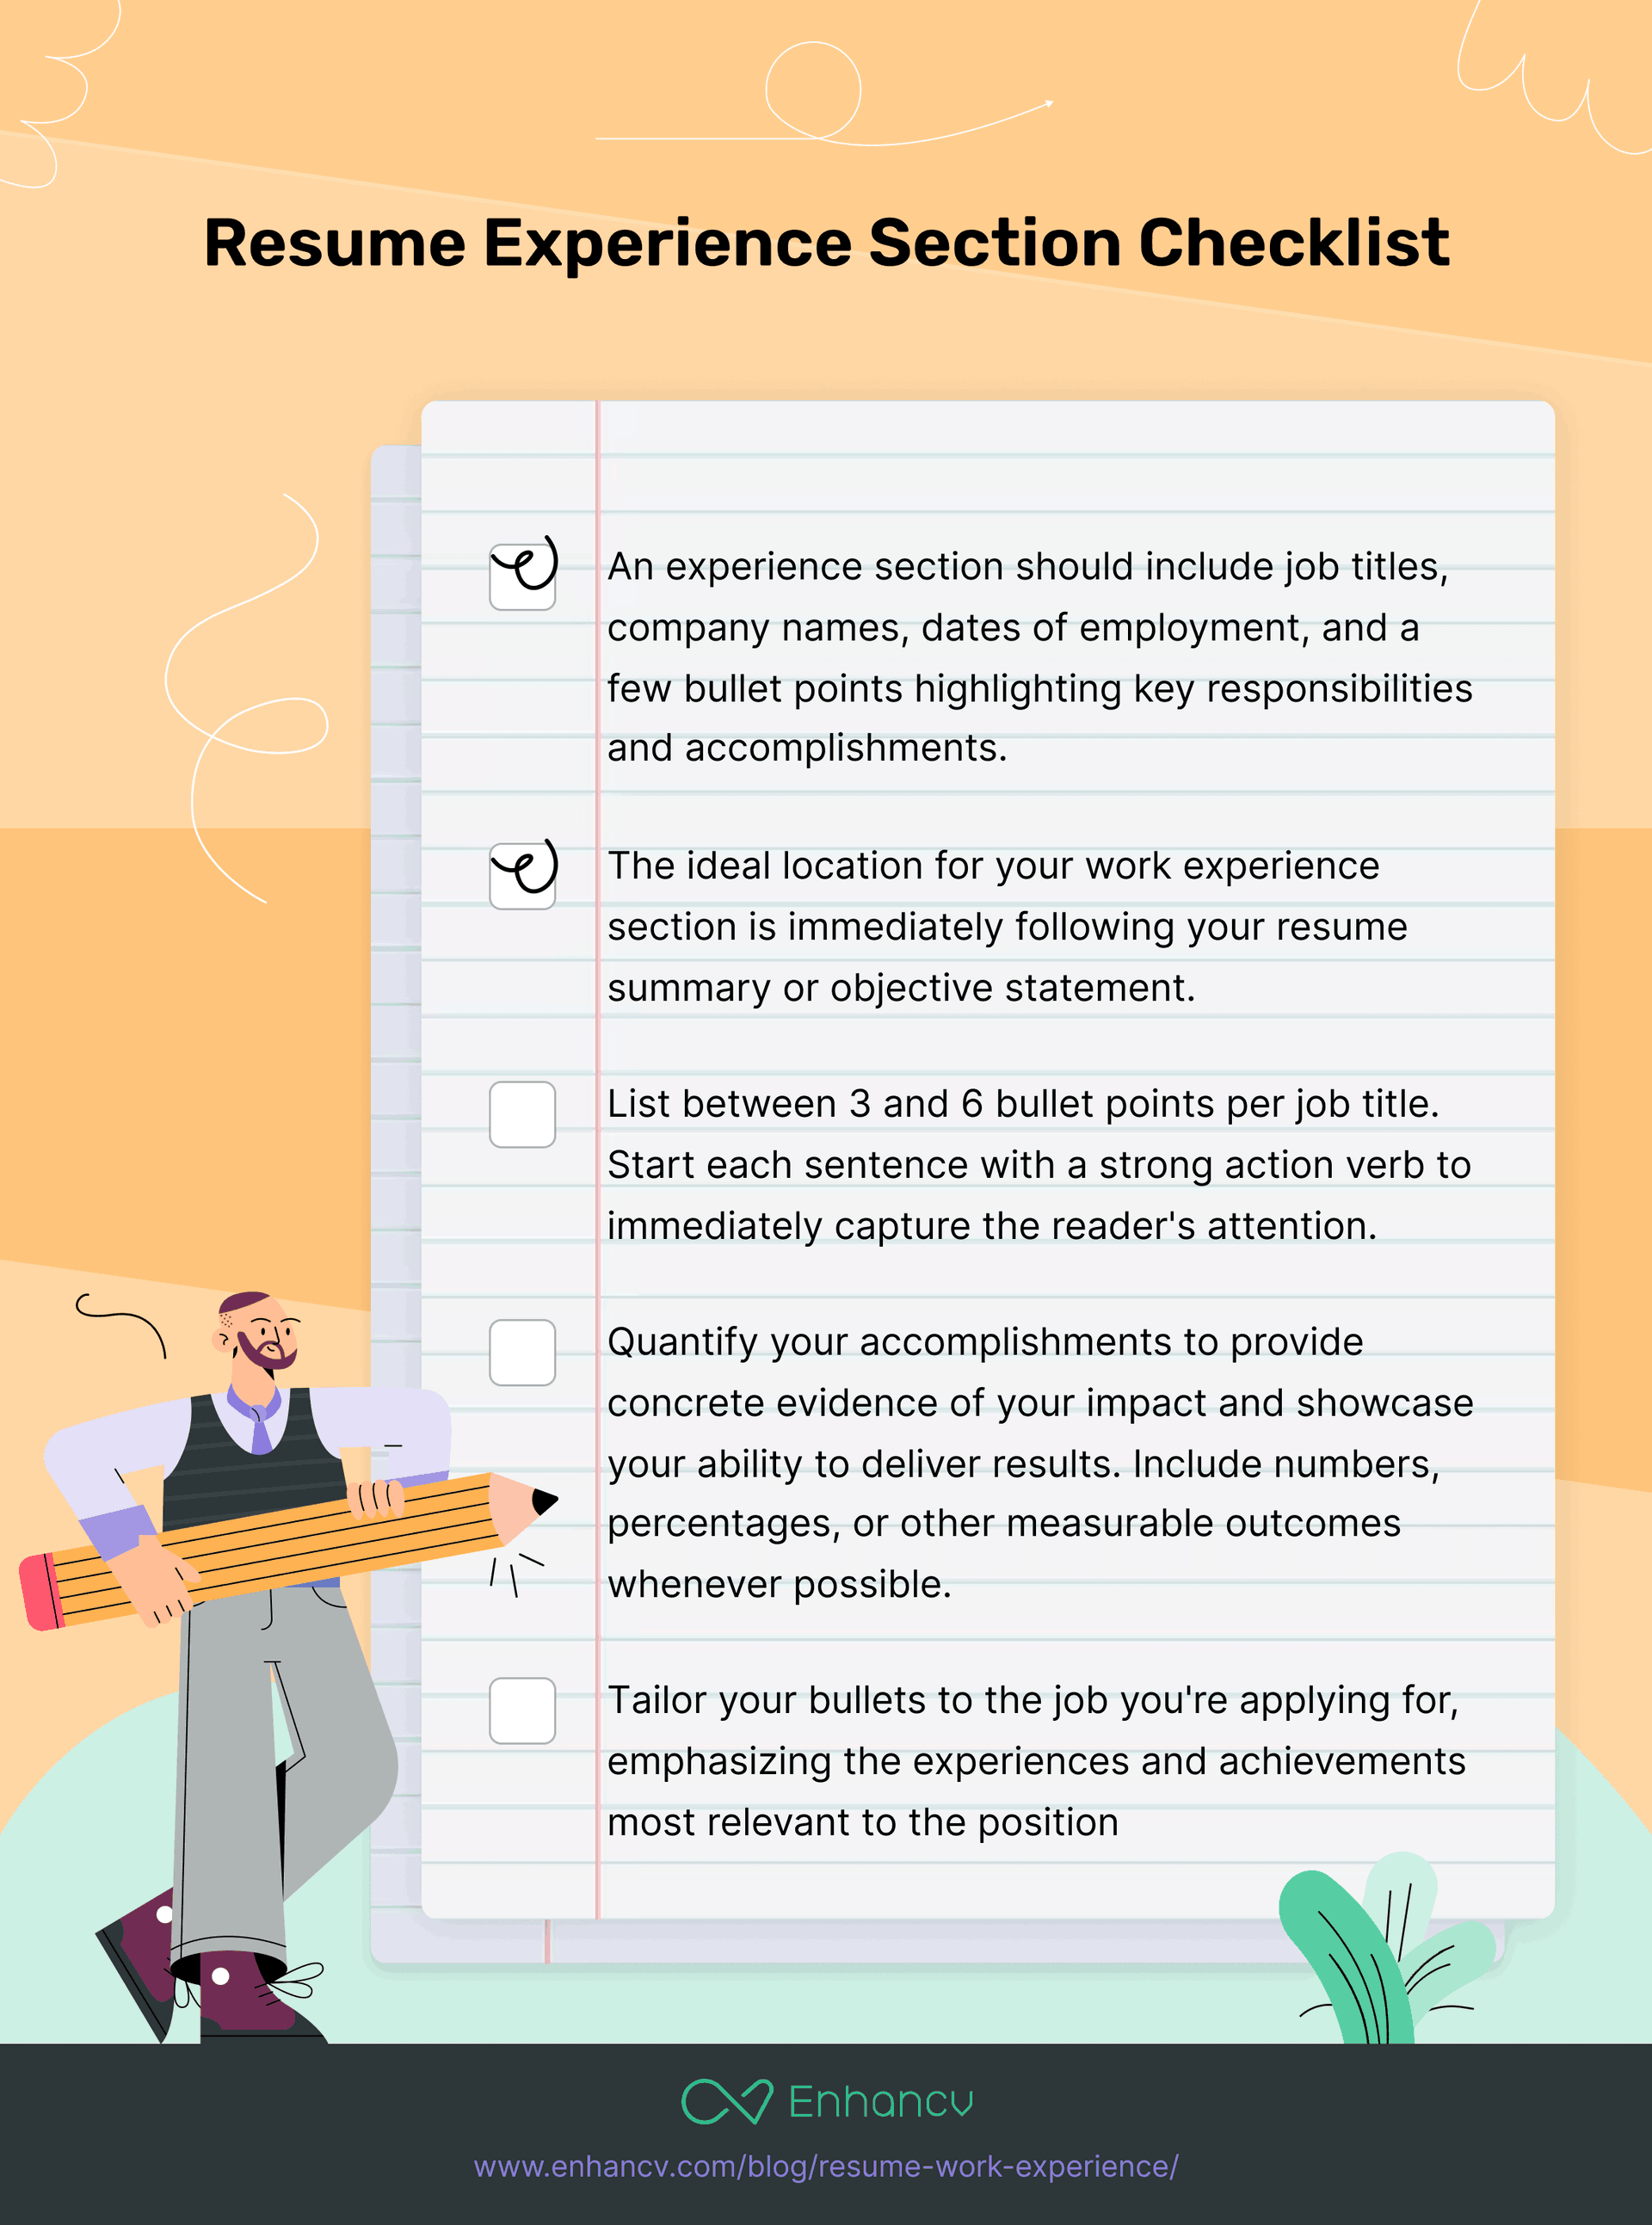 how to write a resume with experience